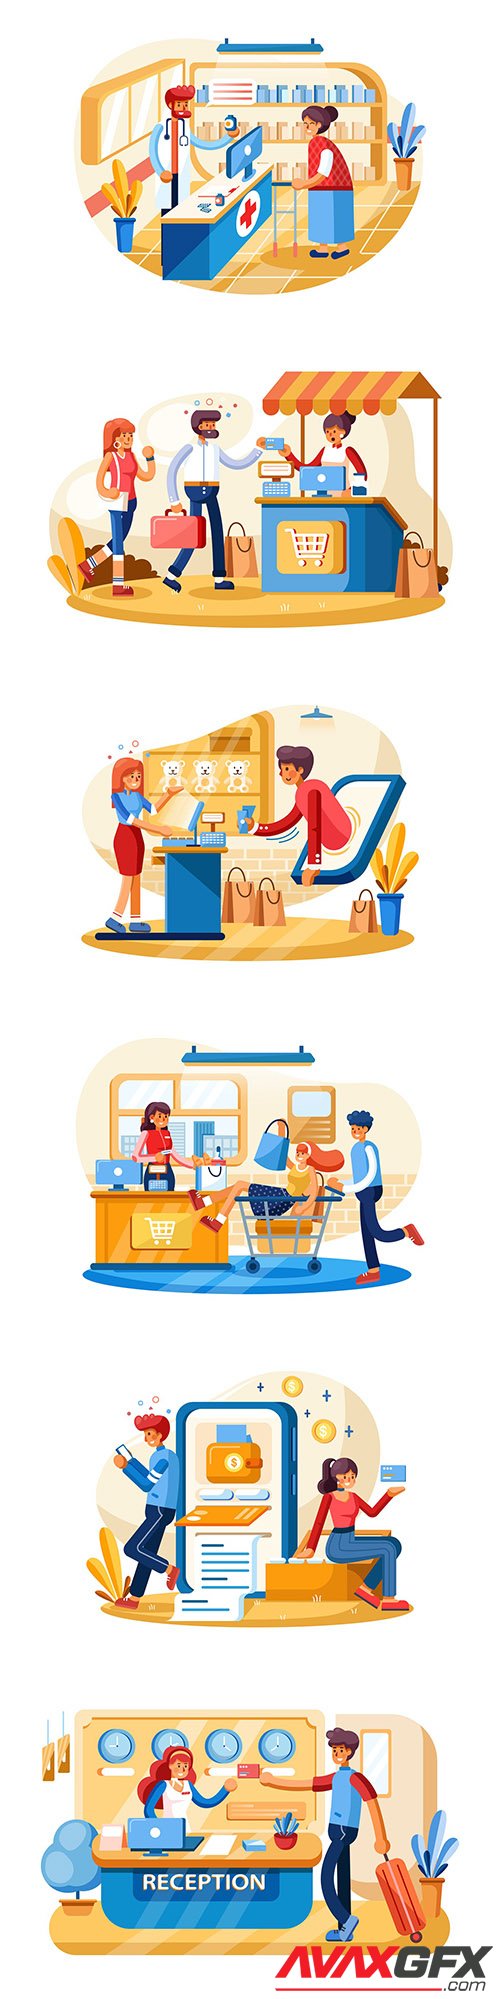 Payment System vector illustration concept.